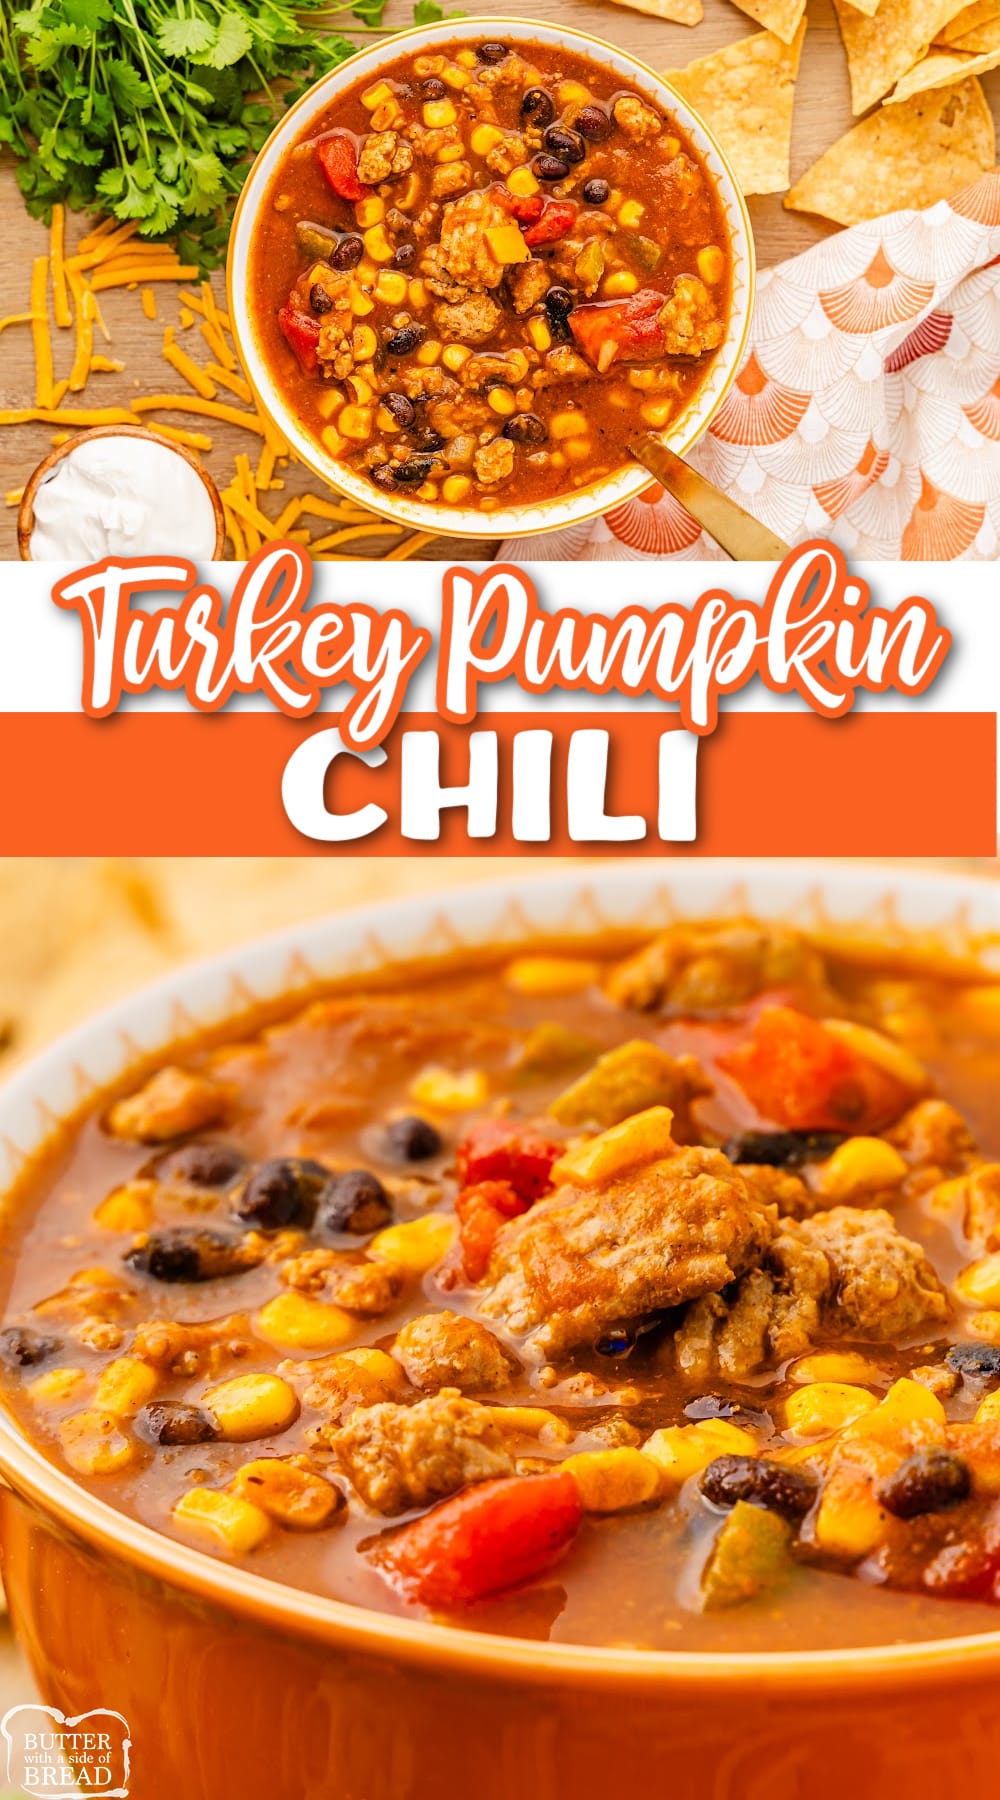 Turkey Pumpkin Chili is a healthy and filling meal made with ground turkey and pumpkin. Easy chili recipe that is ready in less than 30 minutes! 